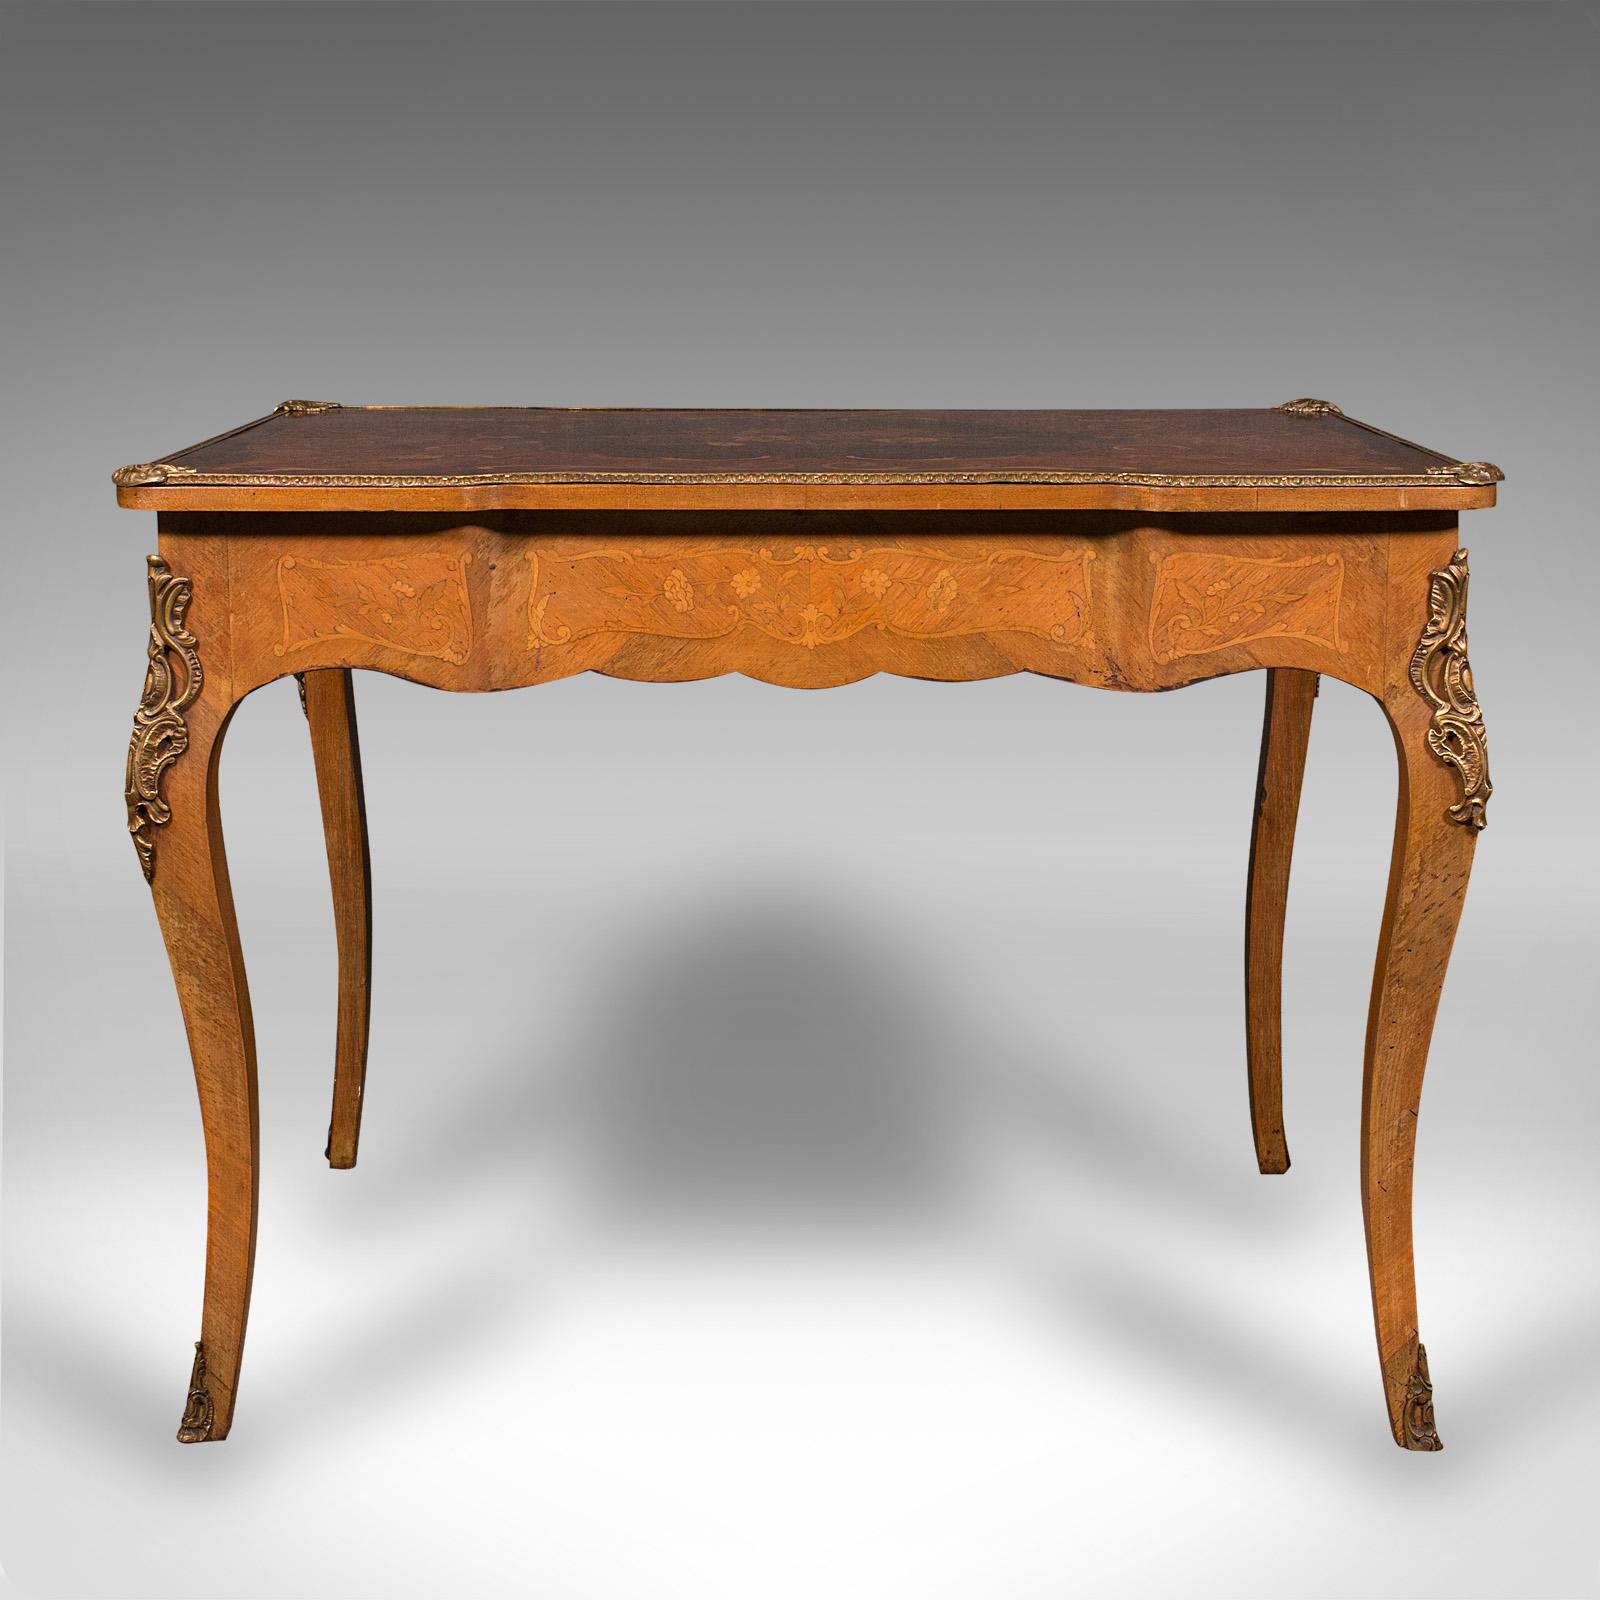 19th Century Antique Writing Desk, French, Decorative Centre Table, Louis XV Taste, Victorian For Sale